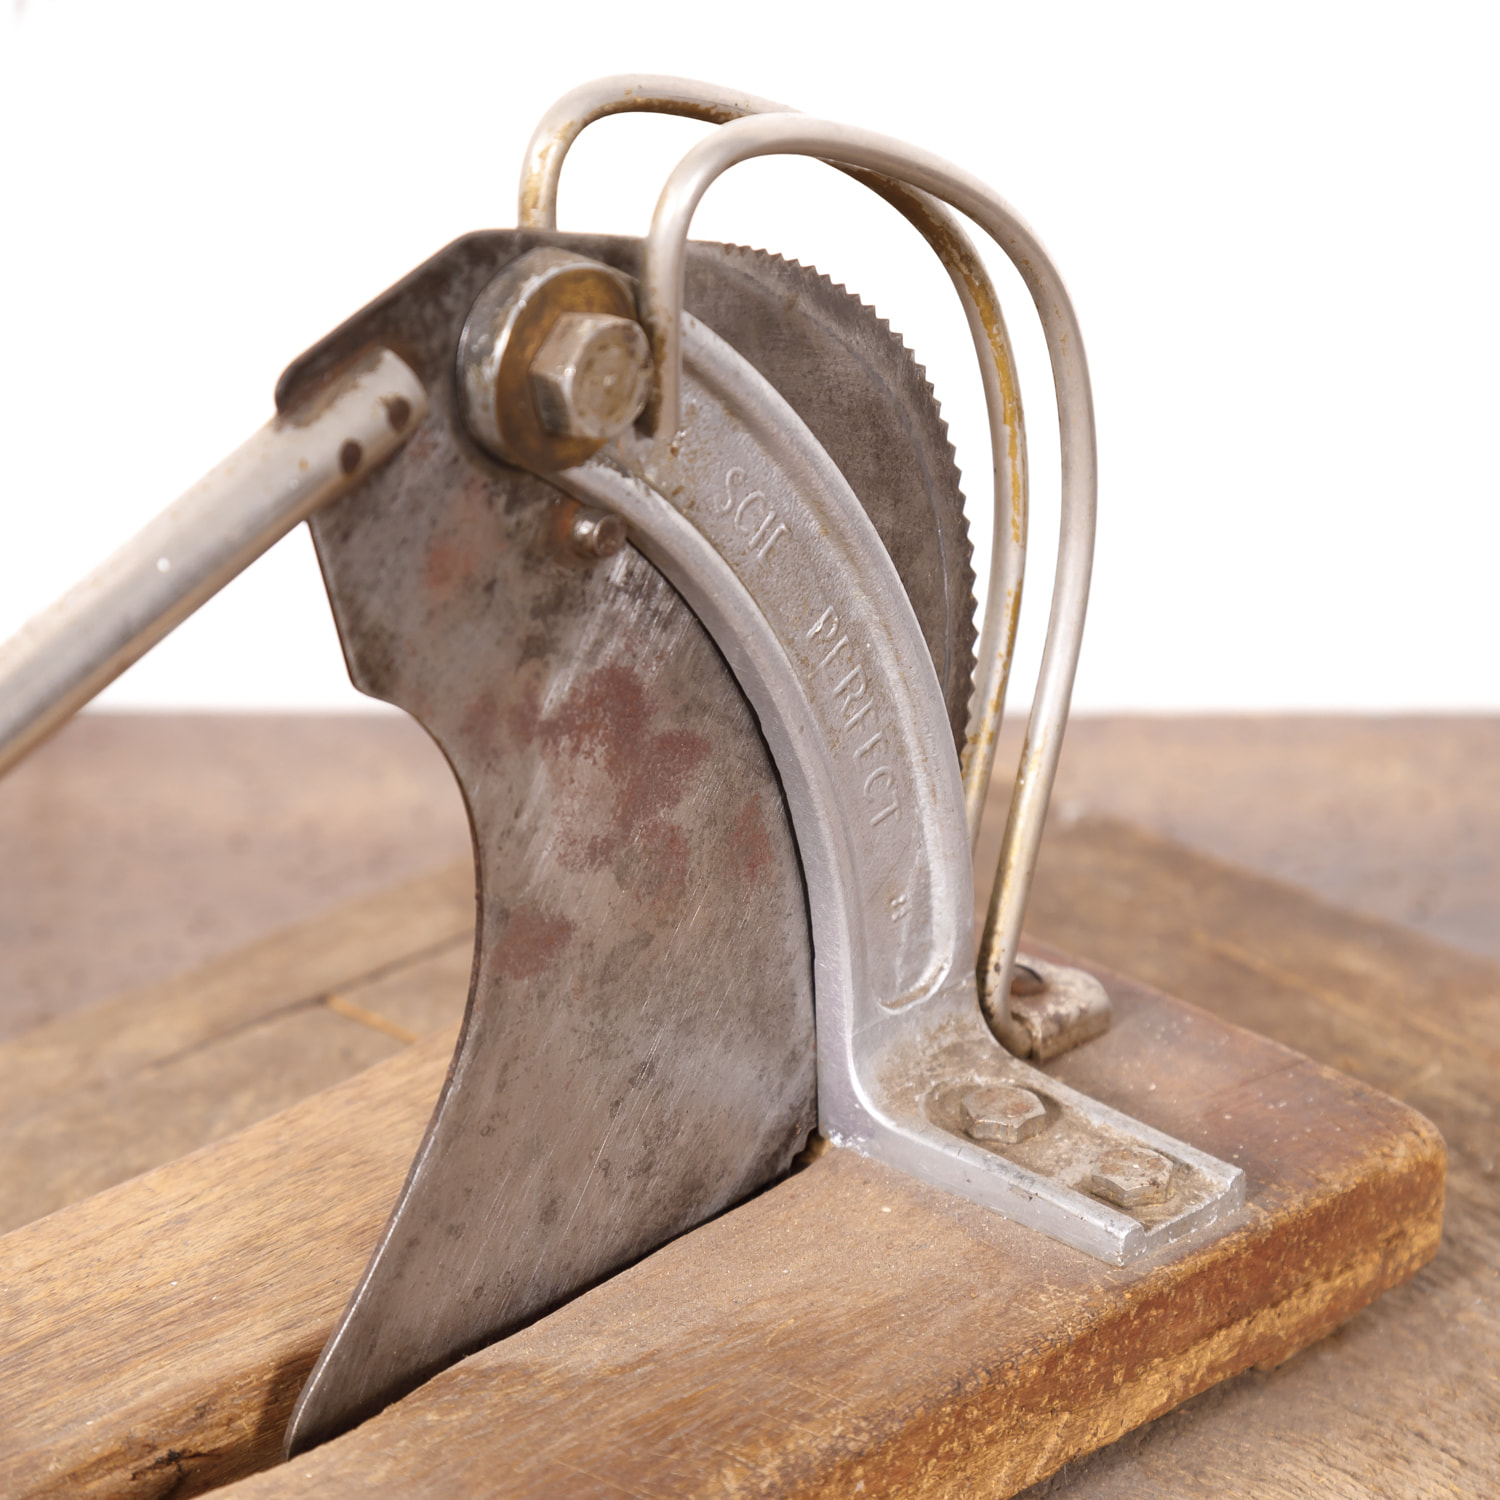 Vintage Bread Slicers Should Require A License To Use